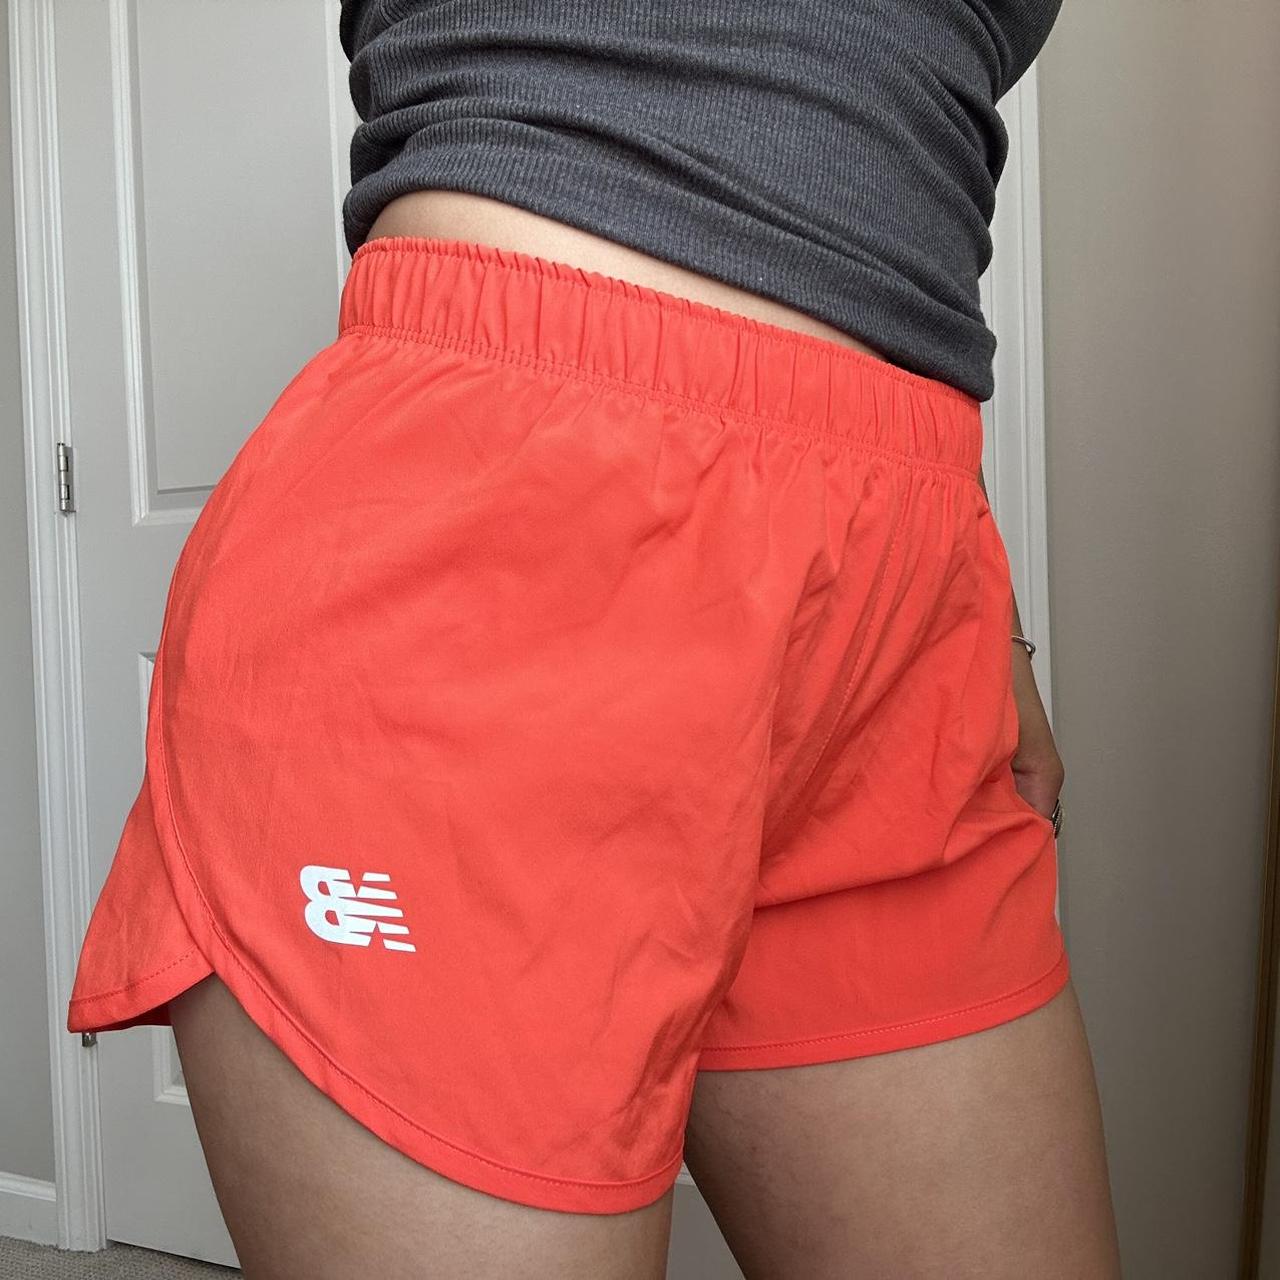 no tag, red new balance shorts, built in underwear, - Depop